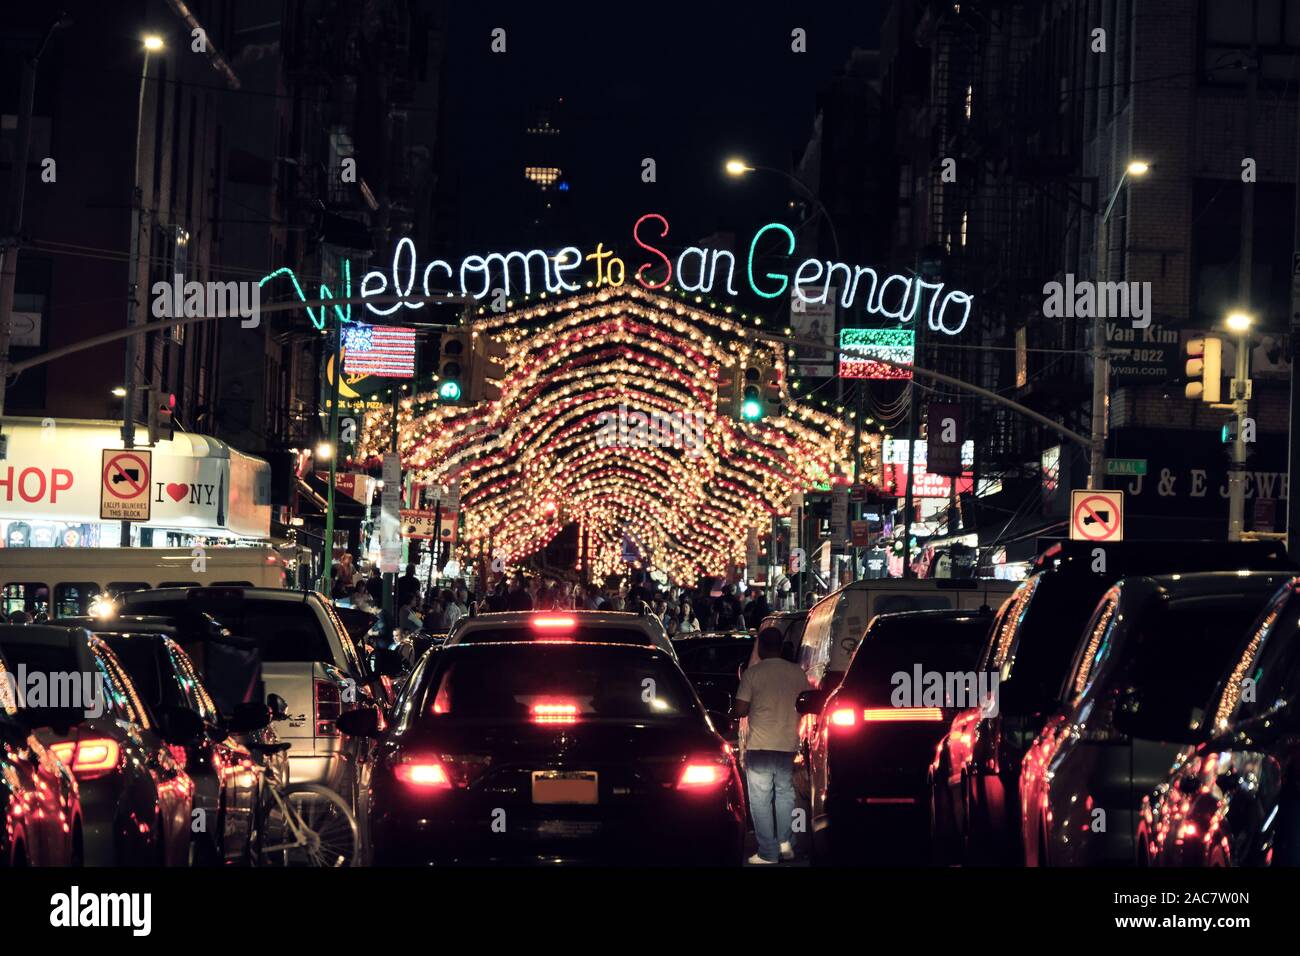 Feast of San Gennaro Festival in Little Italy - New York City Stock Photo